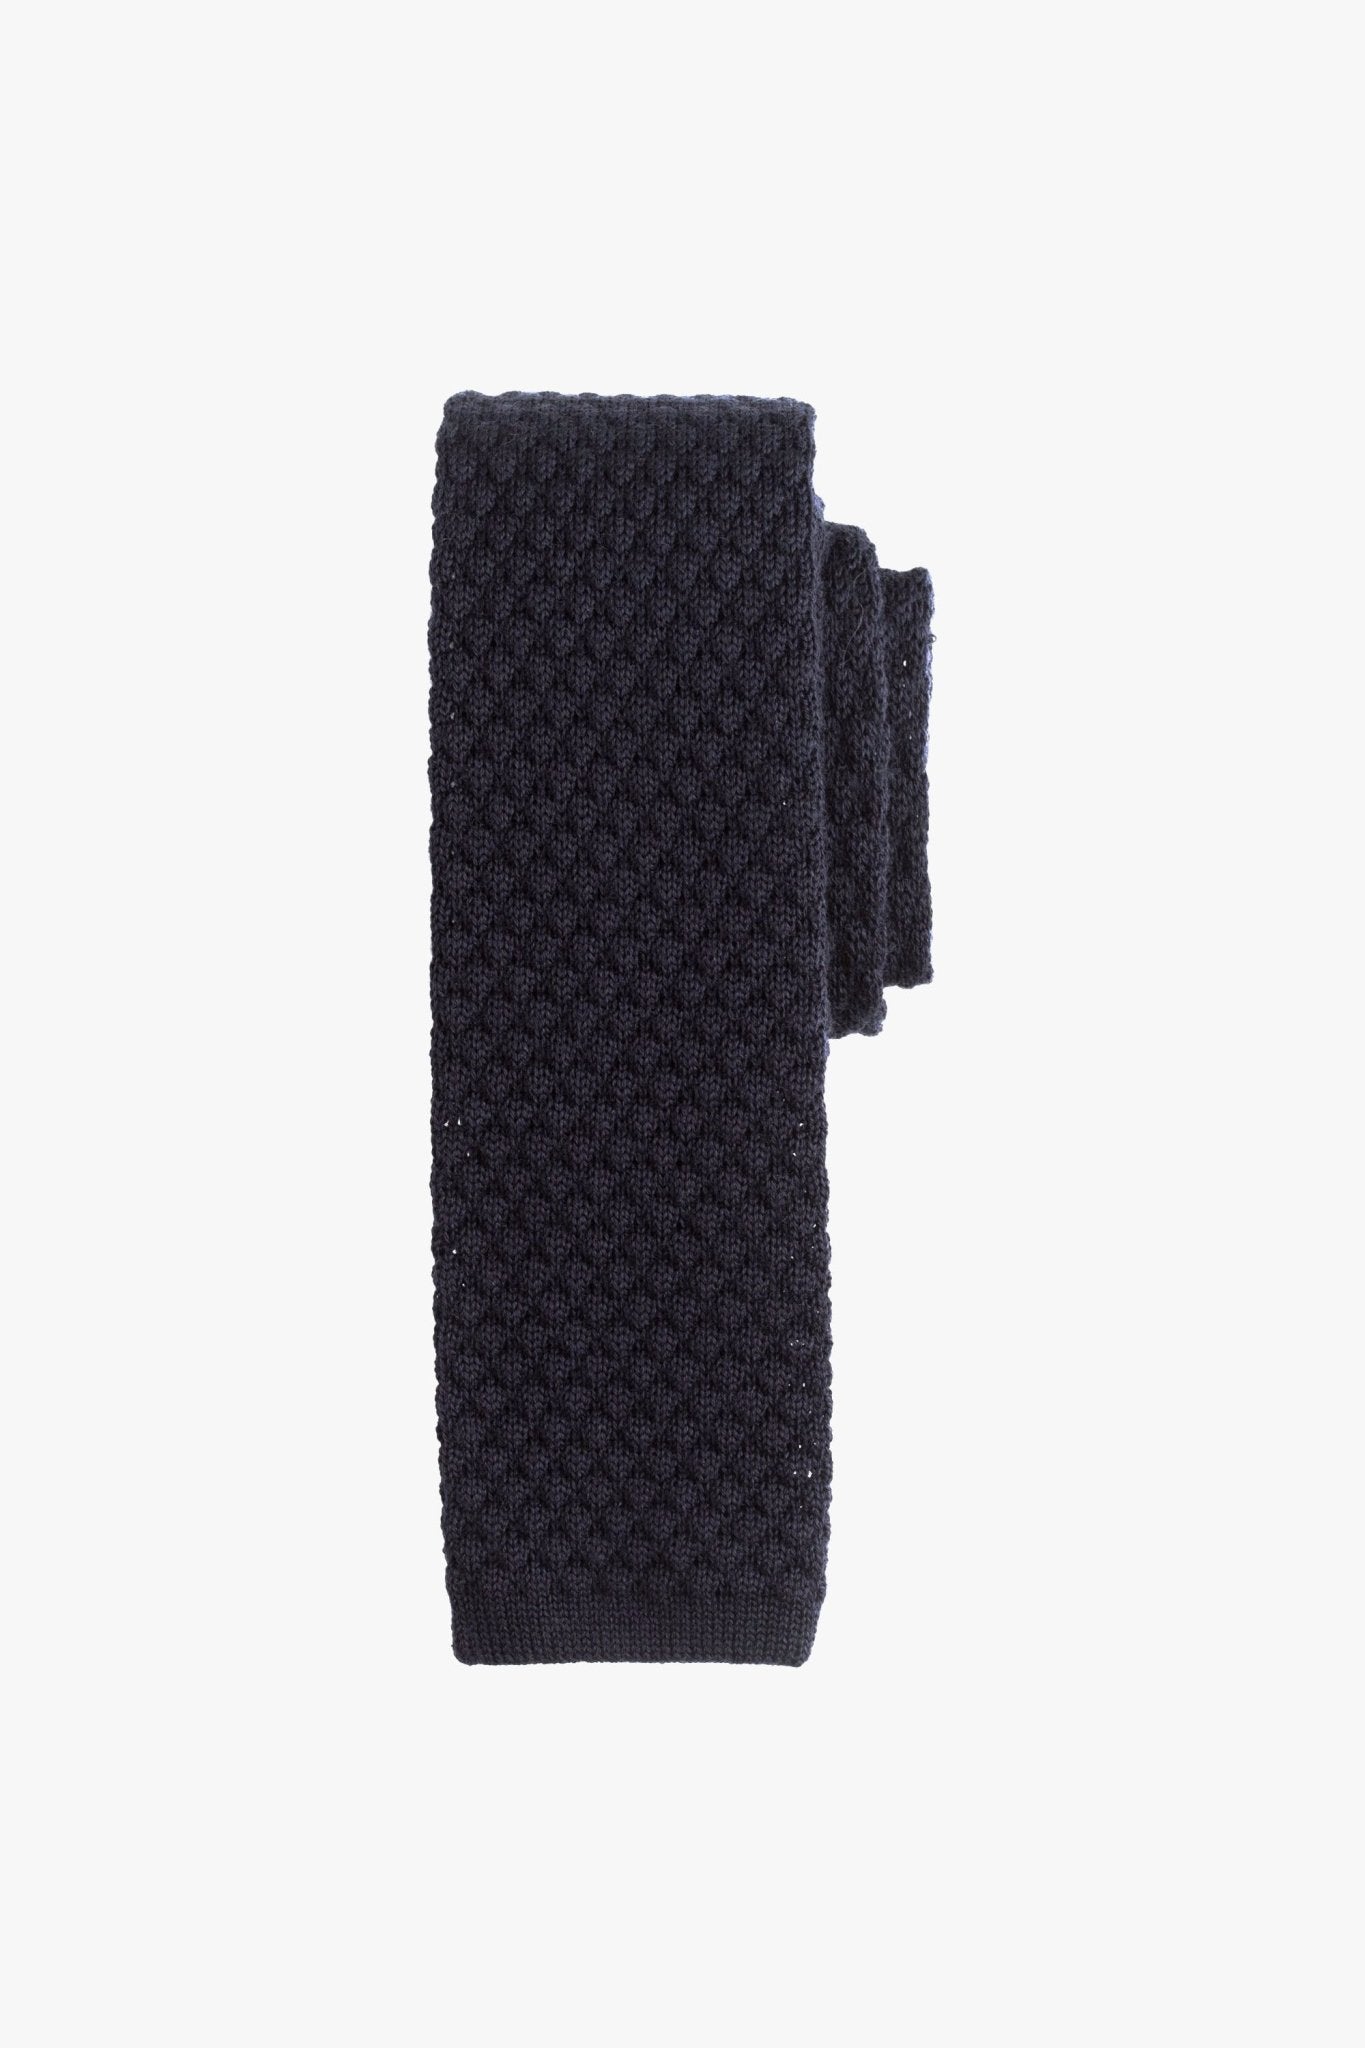 Dark Gray Knitted Tie - My Suited Life